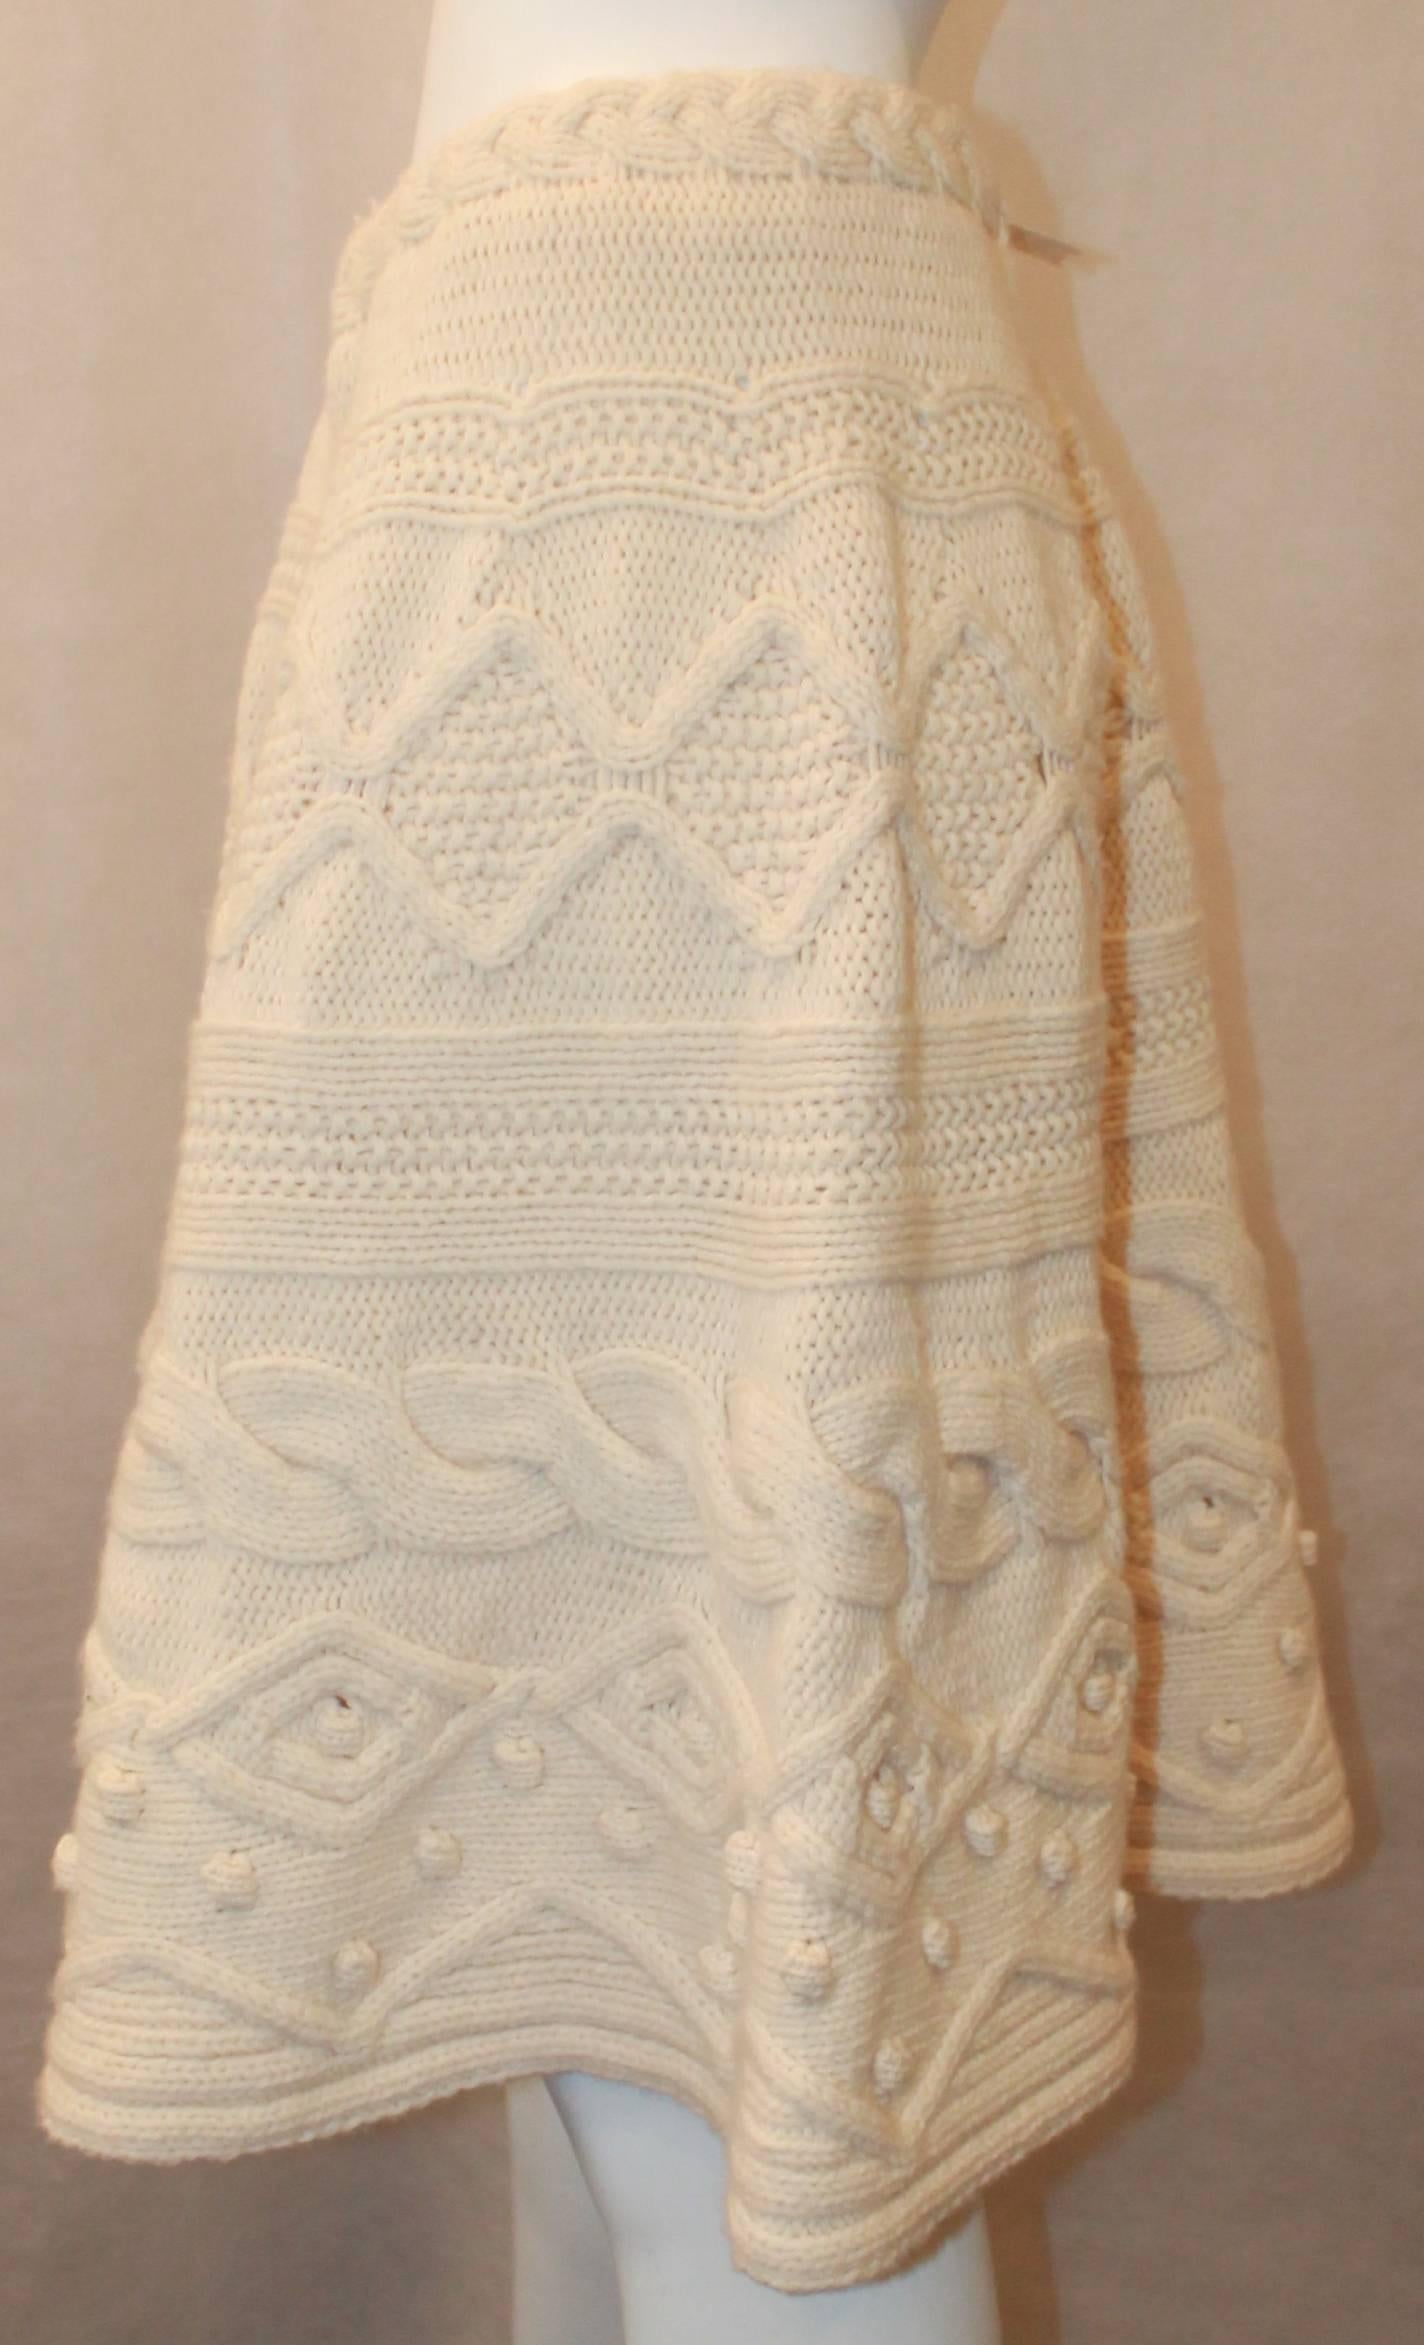 Valentino 1990's Vintage Creme Wool & Cashmere Knitted Skirt - L. This skirt is in excellent vintage condition with very light wear. It is a thick and heavy knit with a patterned design. The skirt has a flowy look and has an elastic